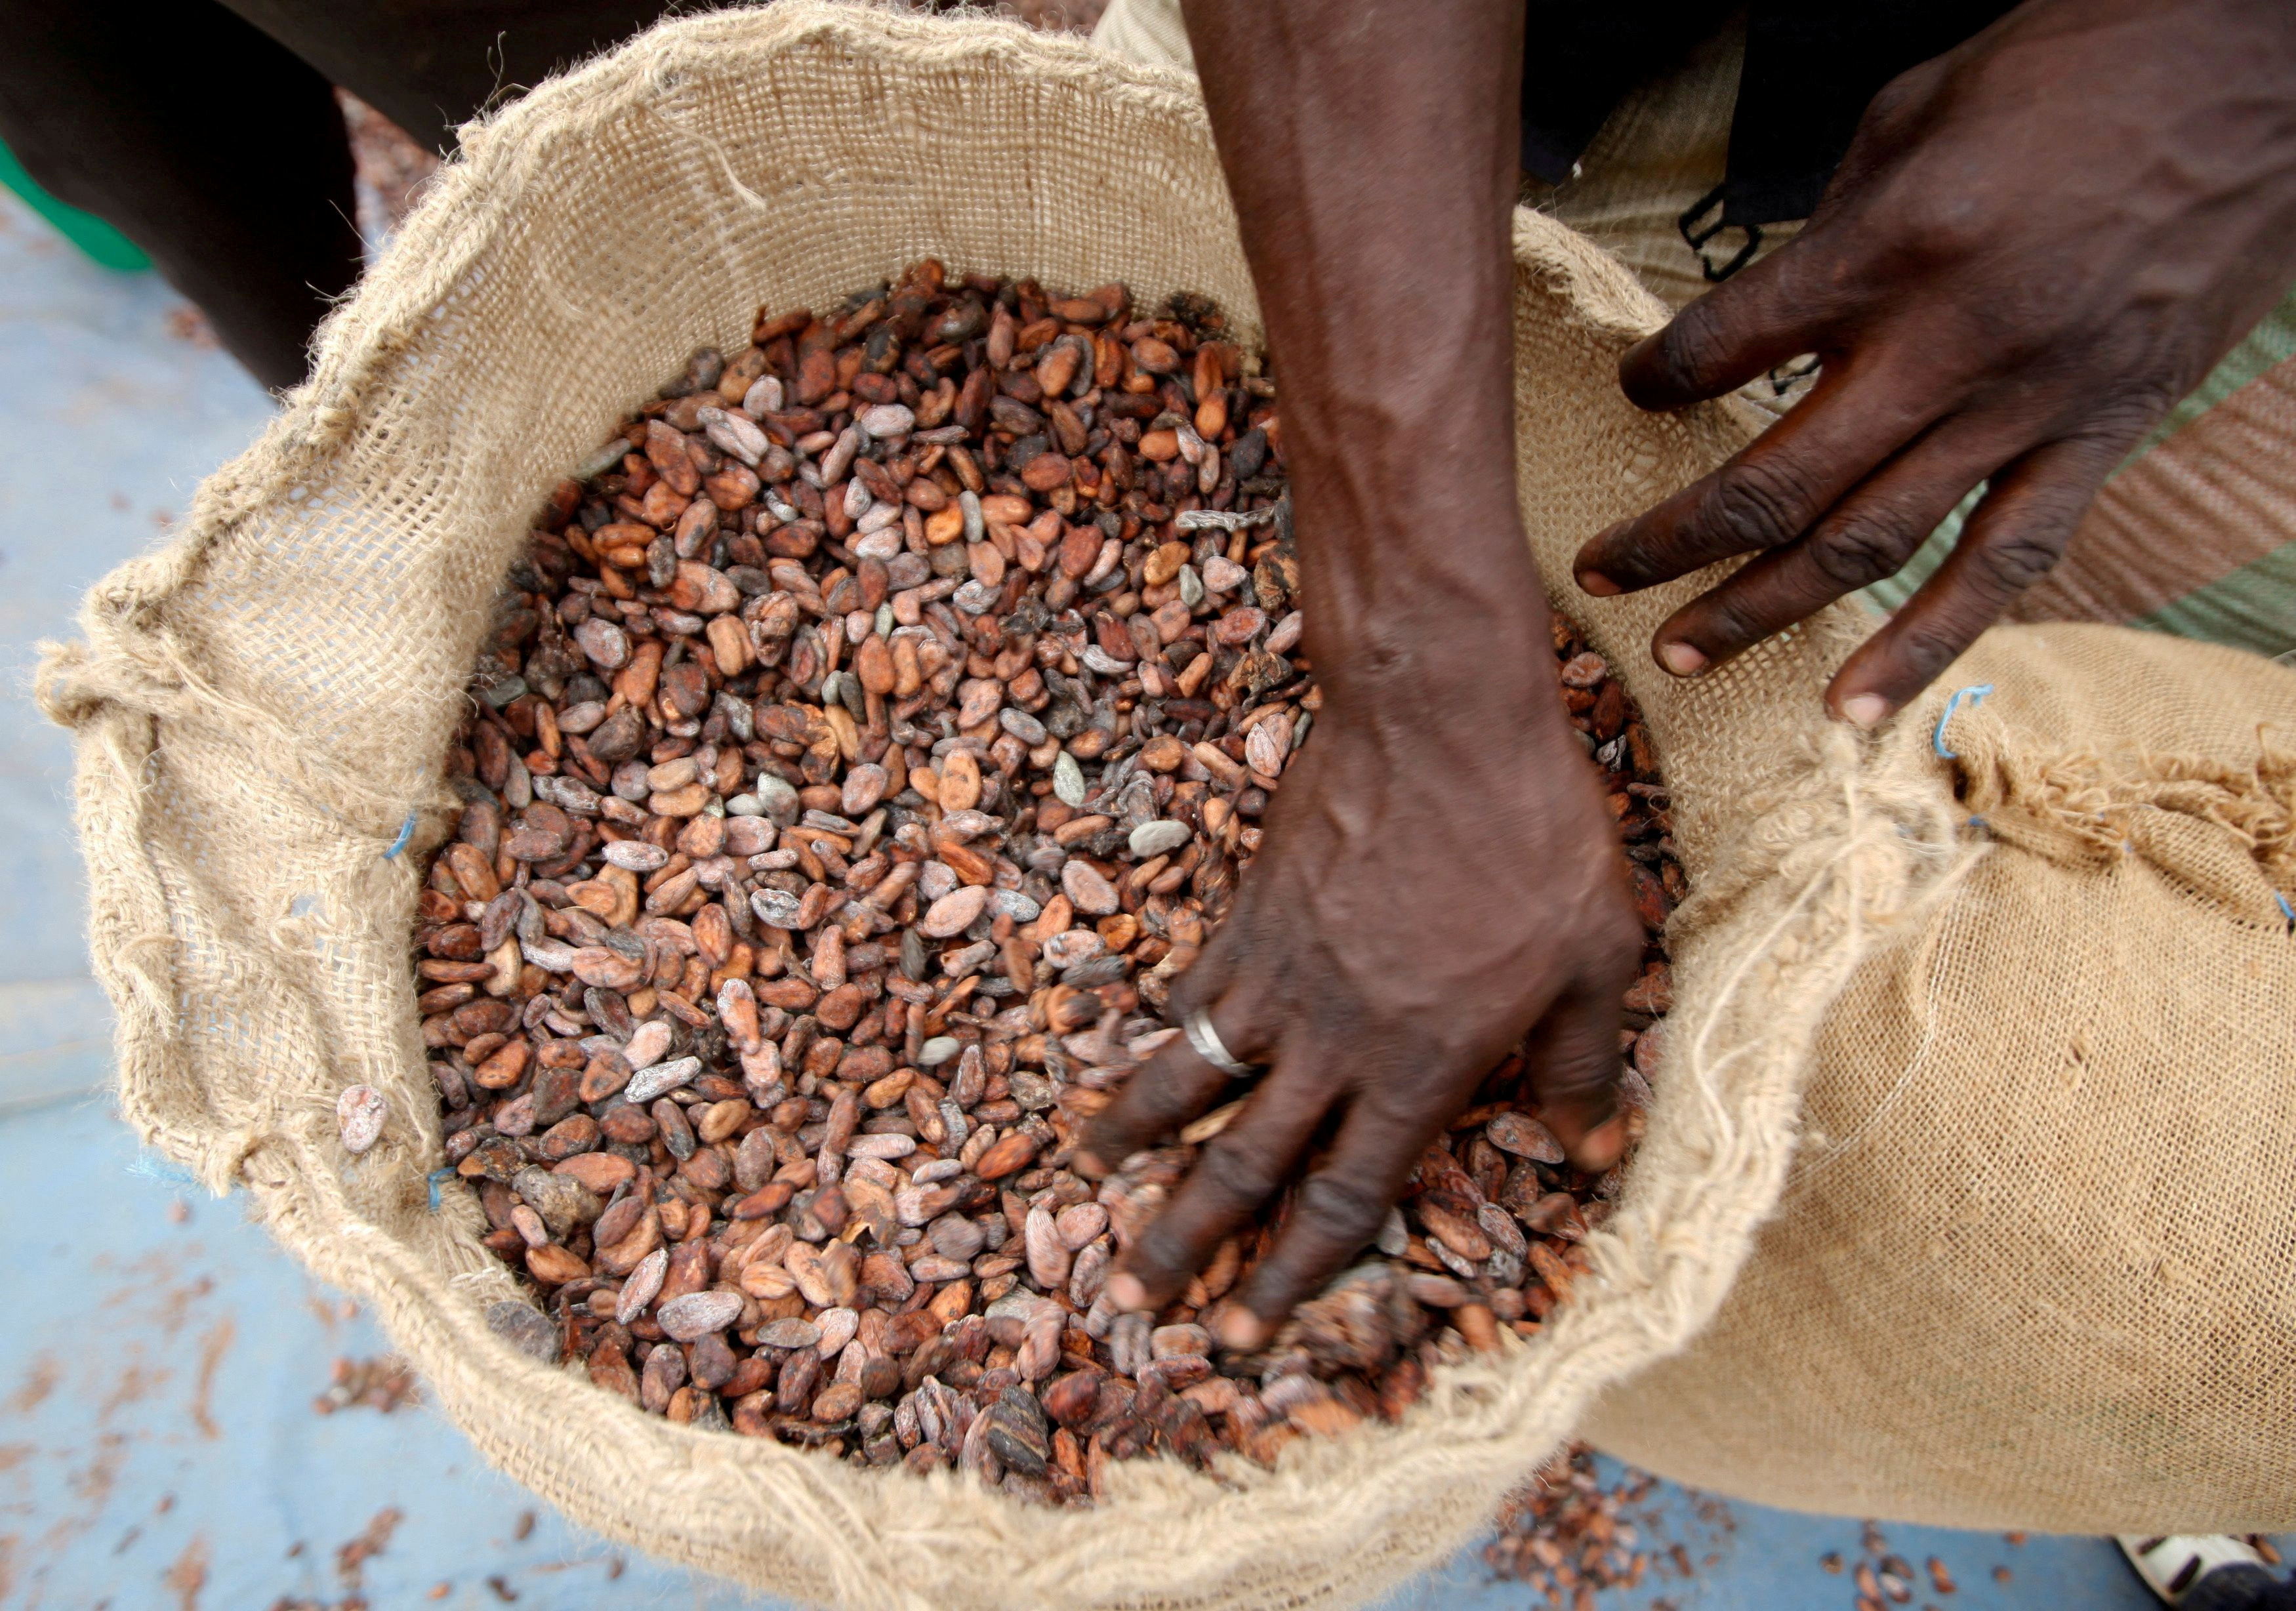 Man prepares cocoa beans for sale in Daloa, which produces a quarter of Ivory Coast's national cocoa output